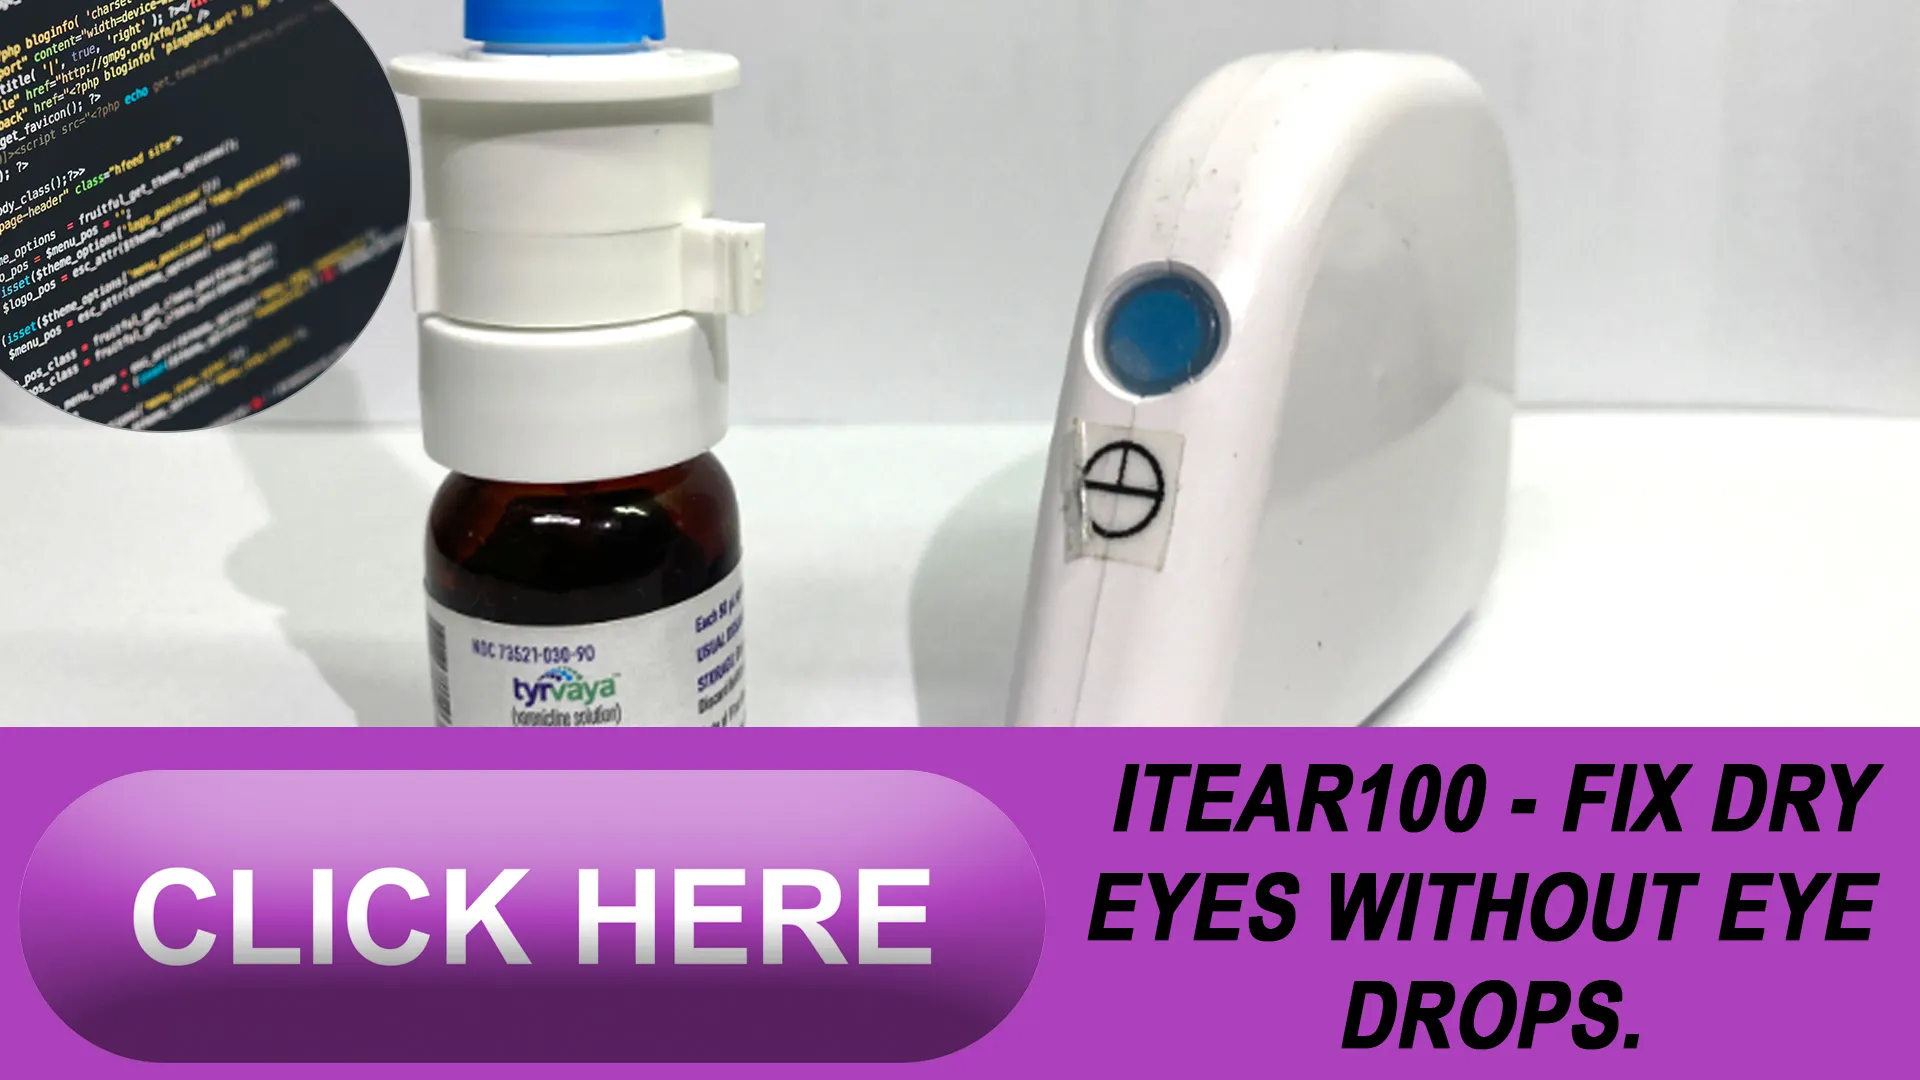 Exploring the Innovative iTEAR100 Device